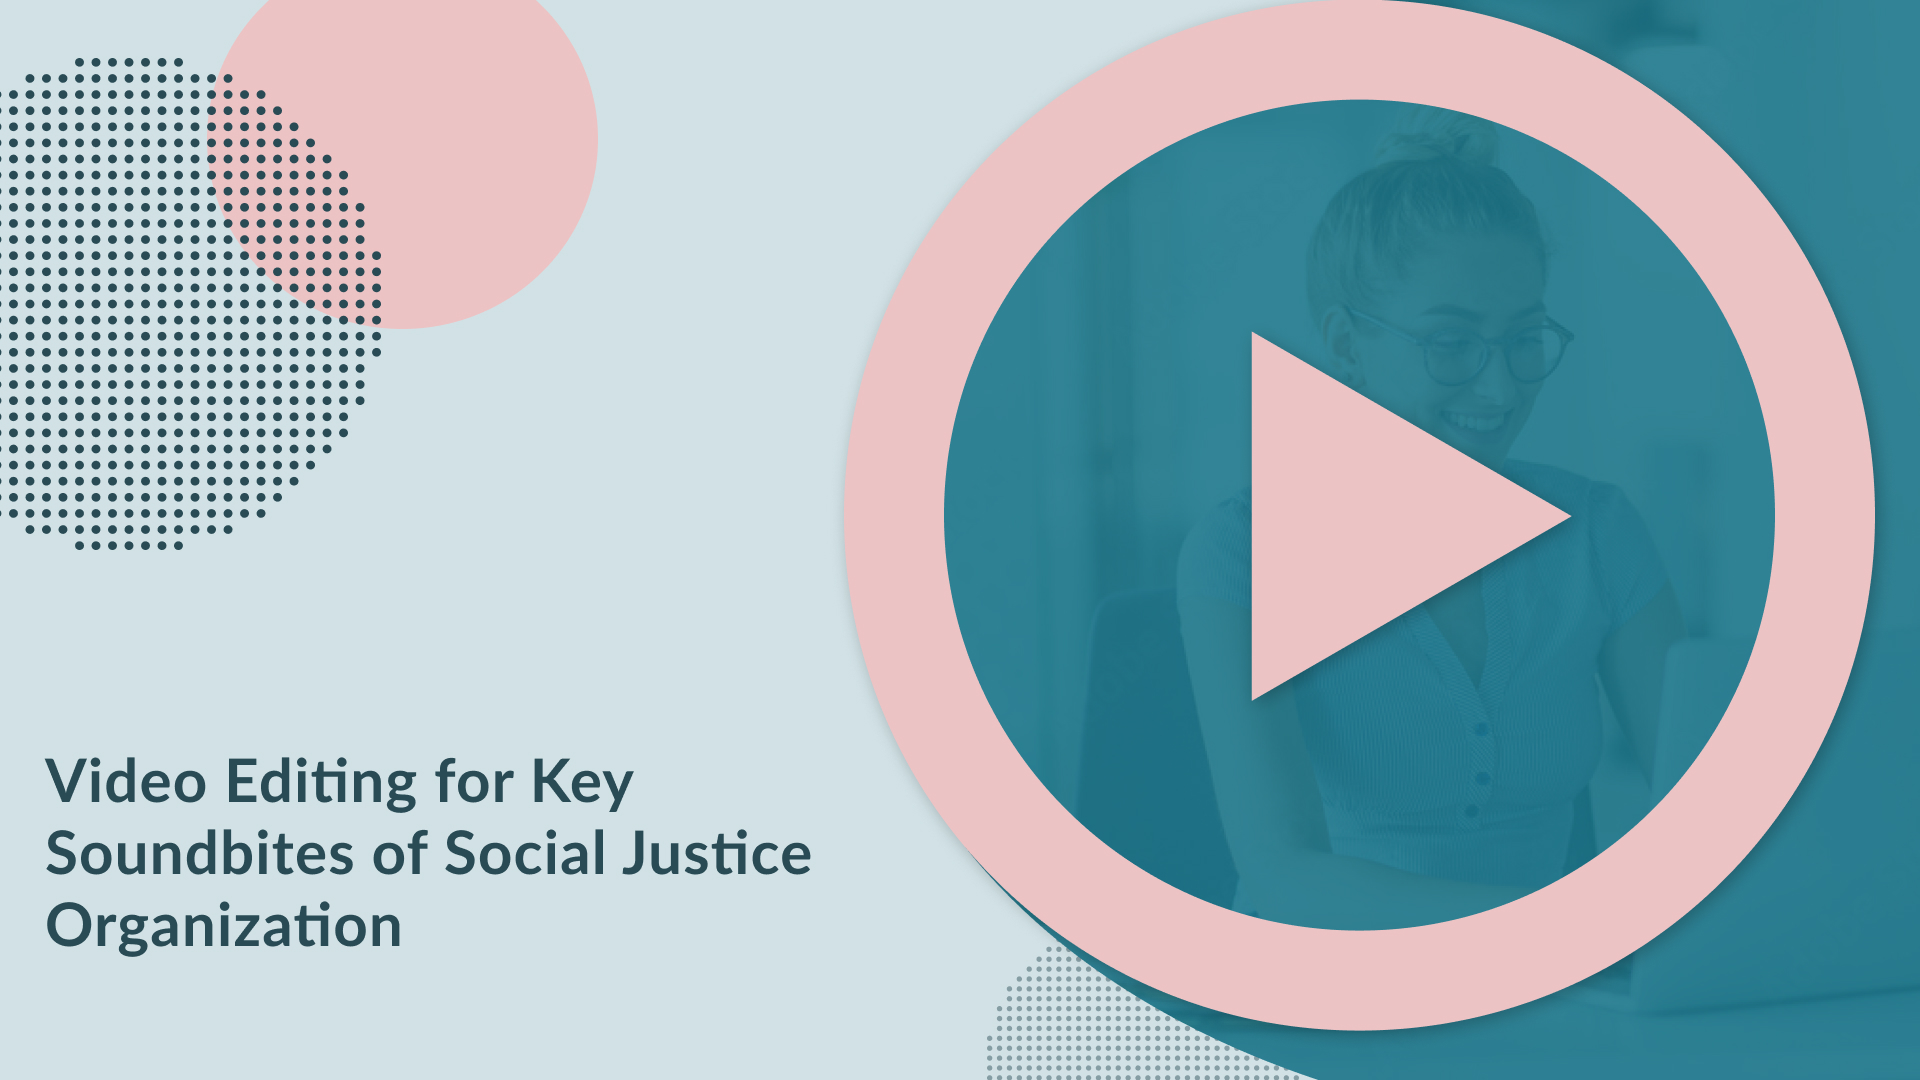 Image Overlay. Text reads, "Video Editing for Key Soundbites of Social Justice Organization"